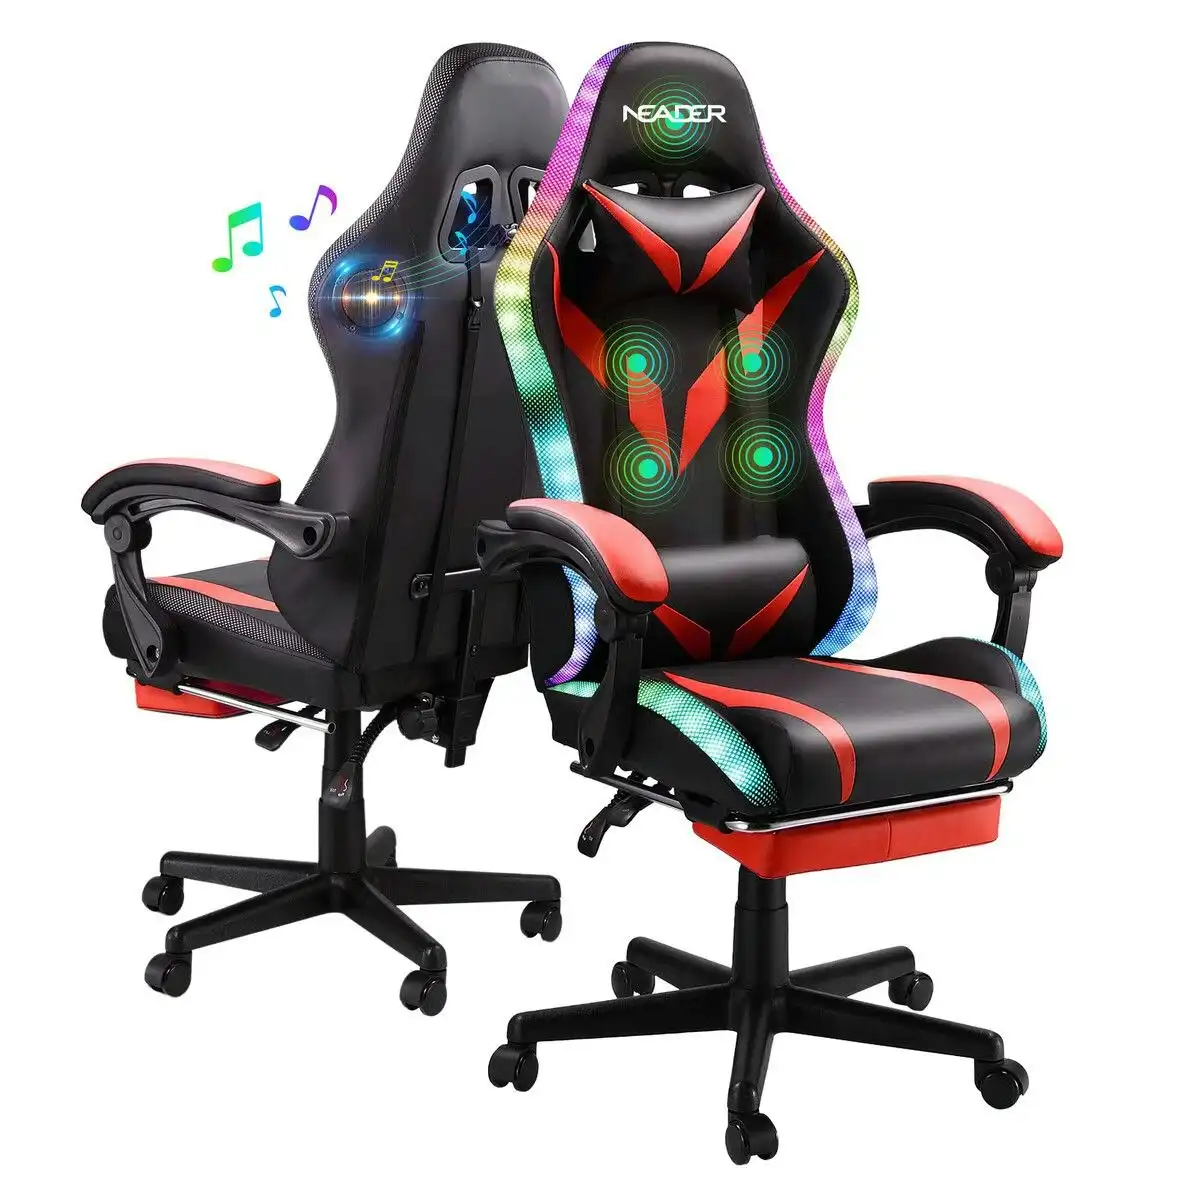 Neader High Back Gaming Chair RGB LED Computer Seat Office Racing Desk Massage Bluetooth Speakers PU Leather Headrest Footrest Work Study Red